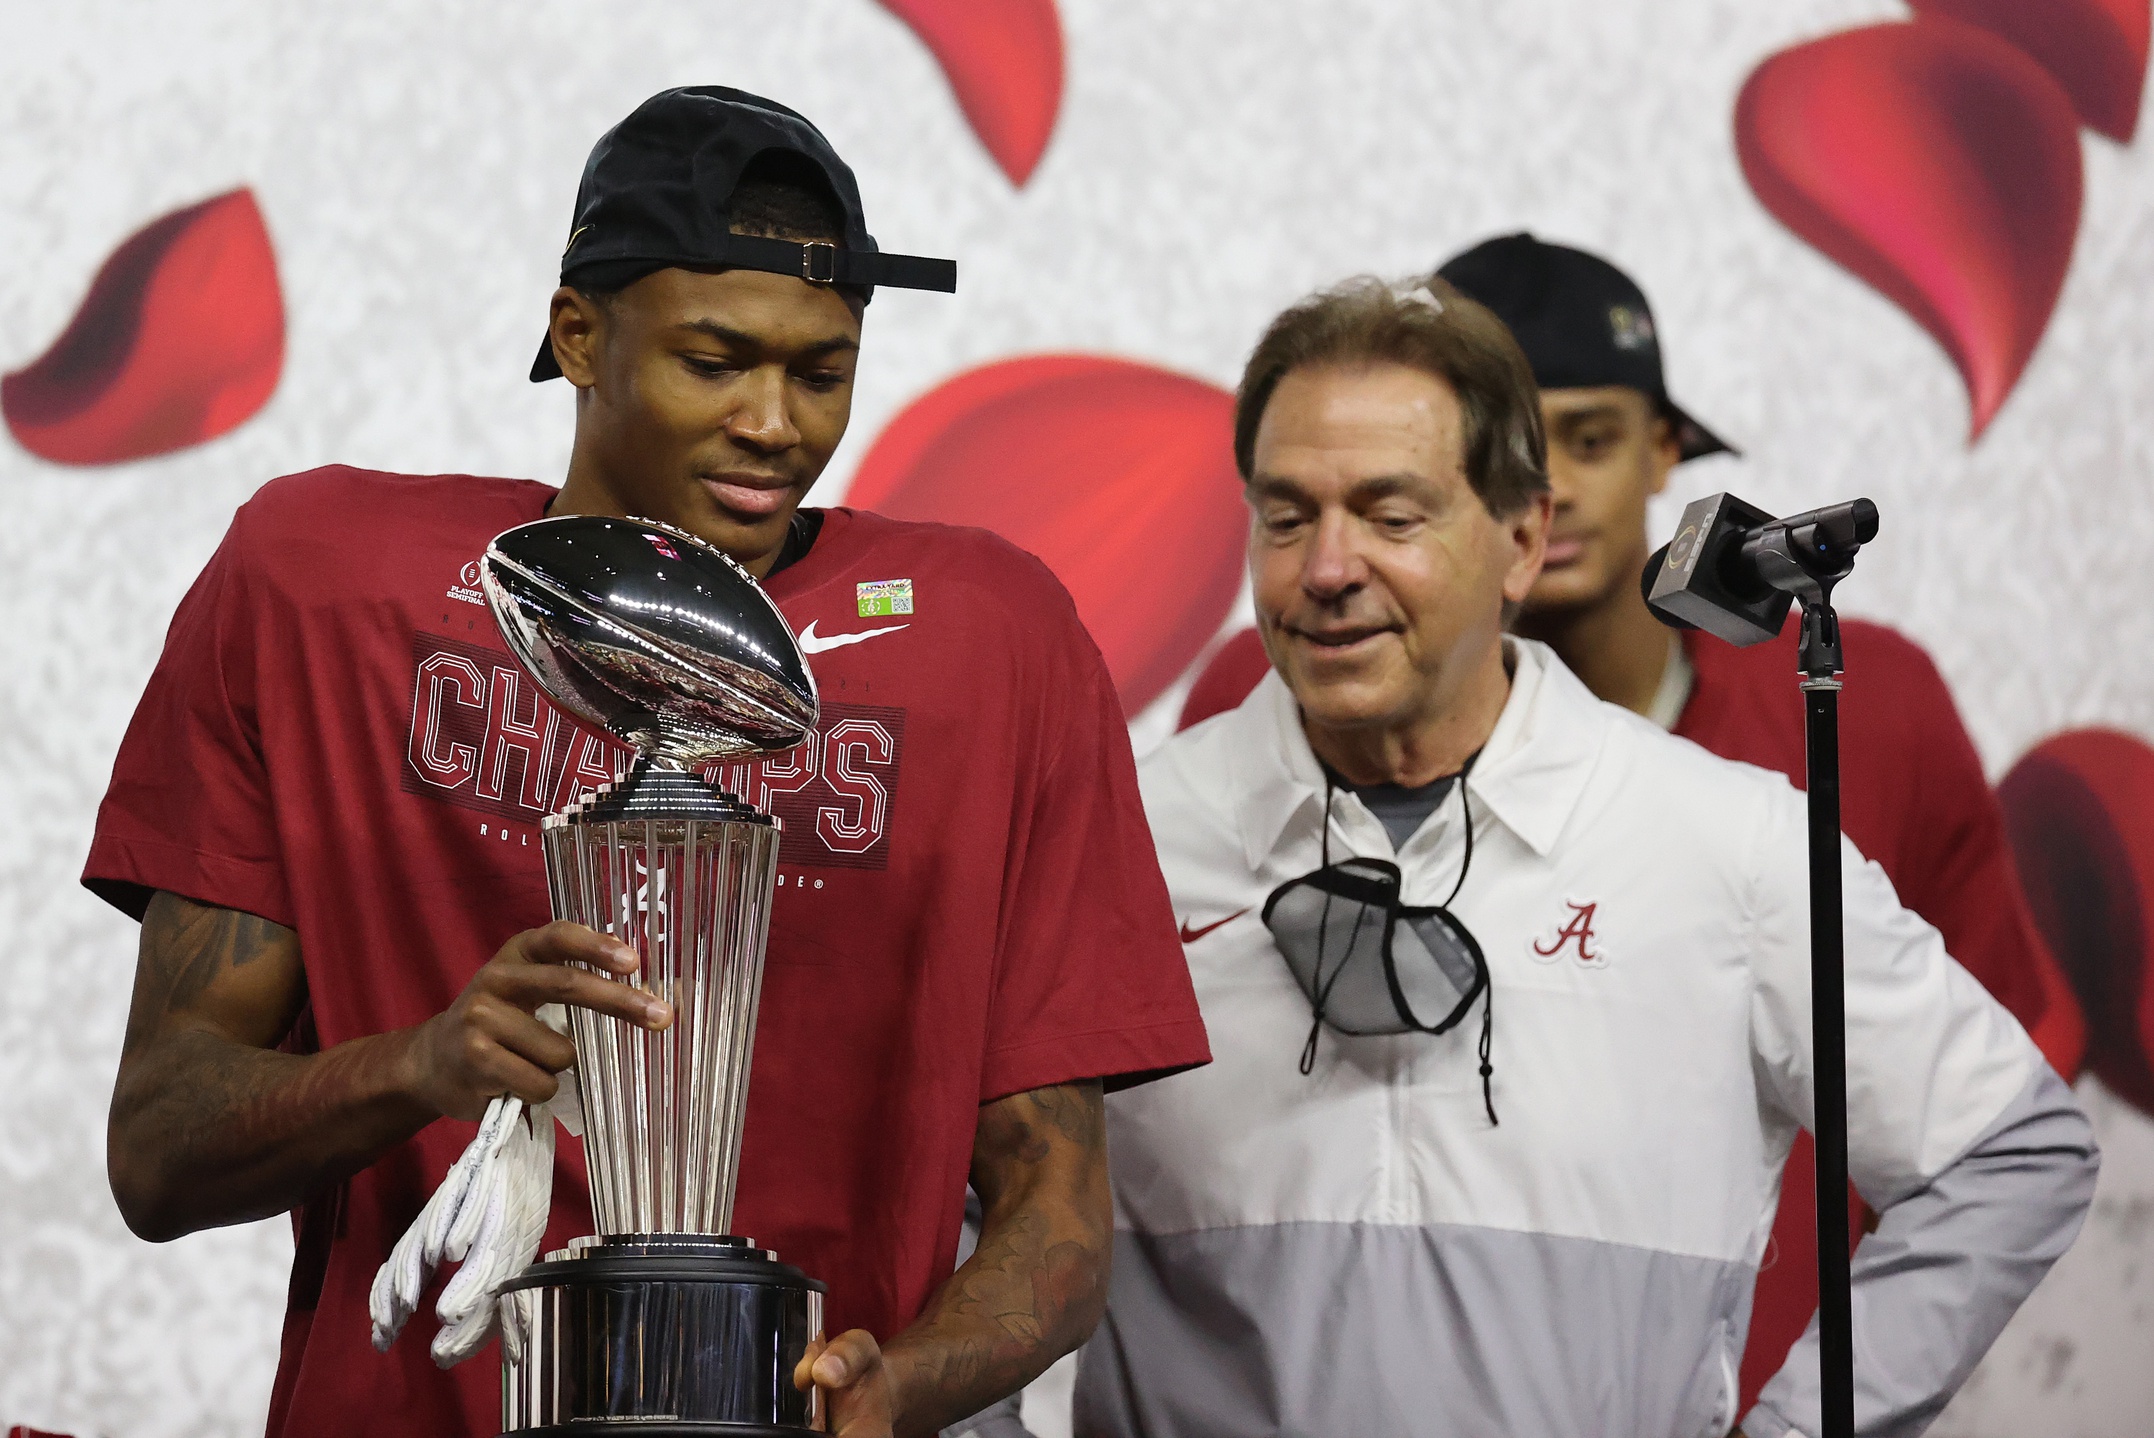 How to watch the national championship game between Ohio and Alabama